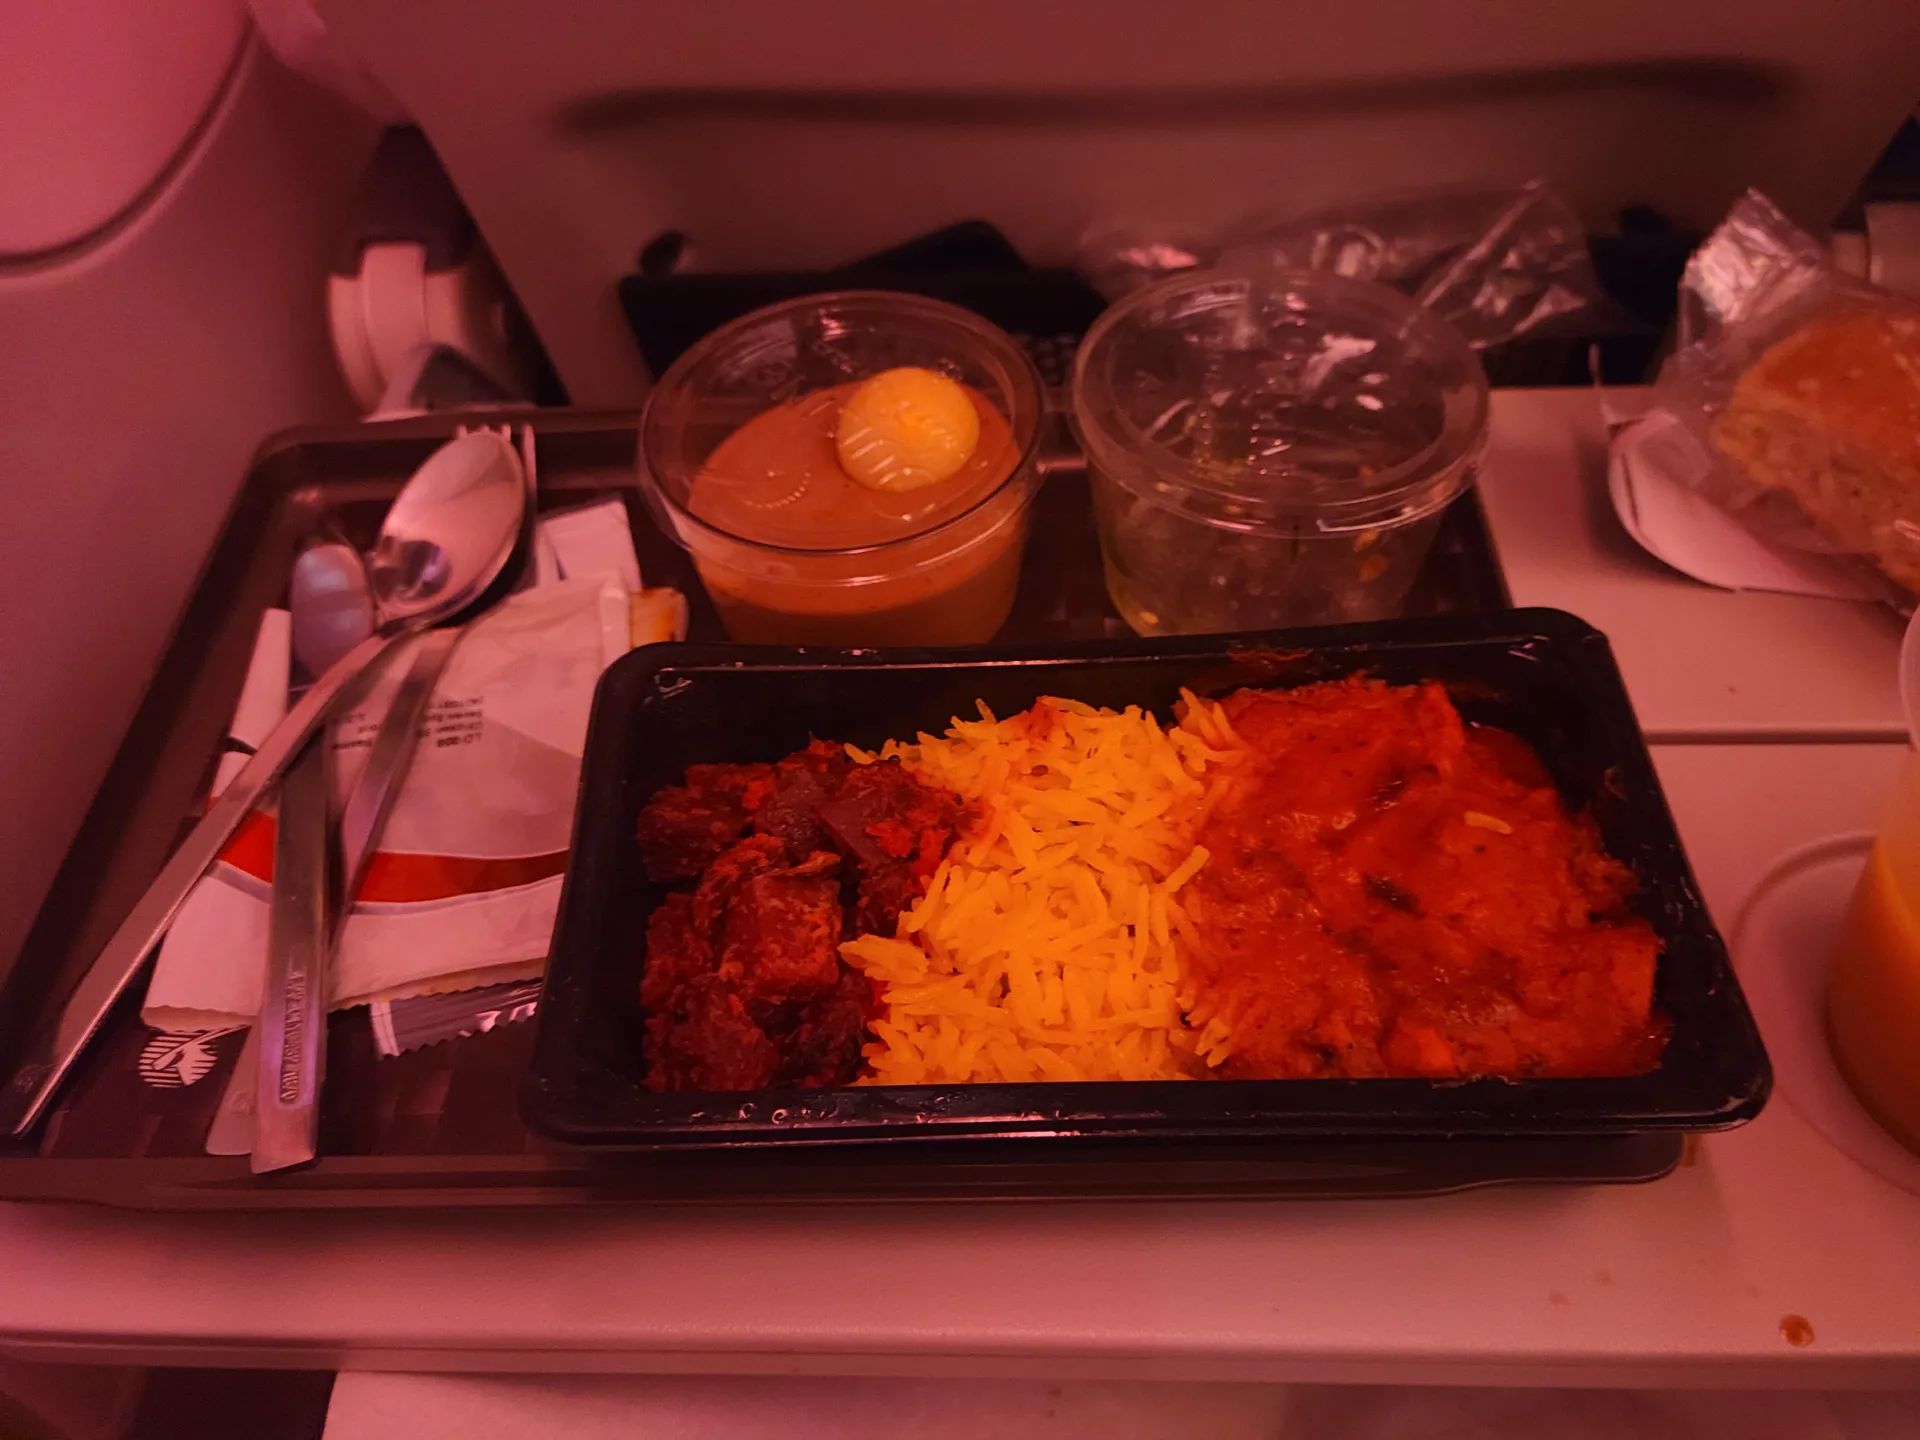 Not your typical airline food